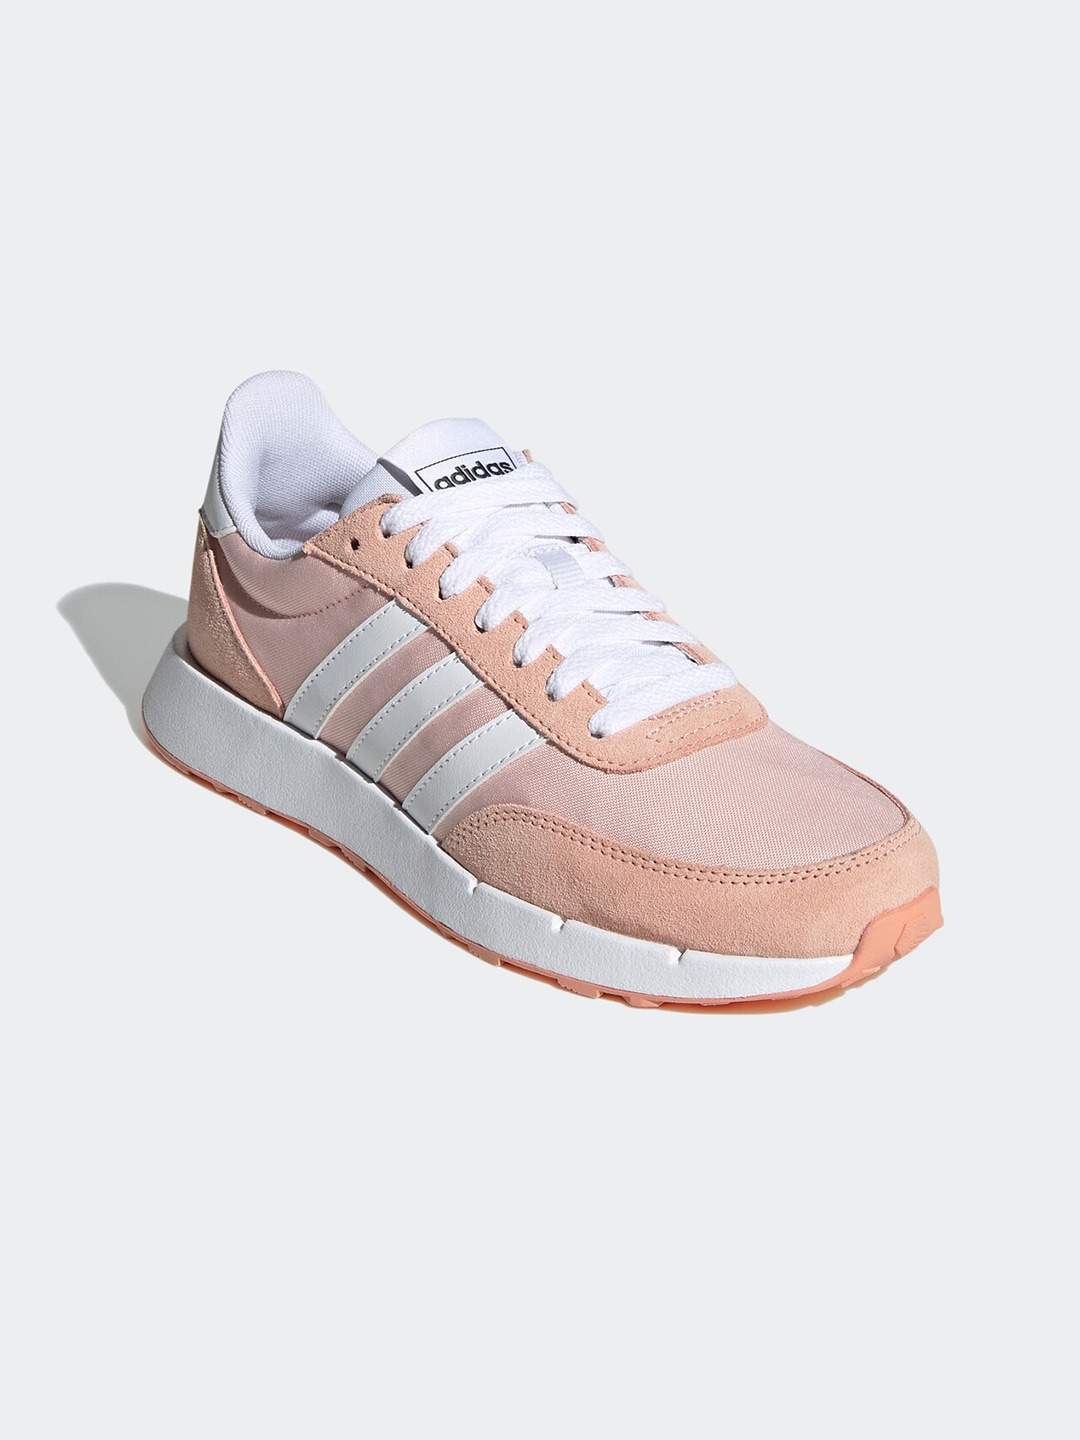 ADIDAS Women RUN 60s 2.0 Leather Running Shoes Price in India